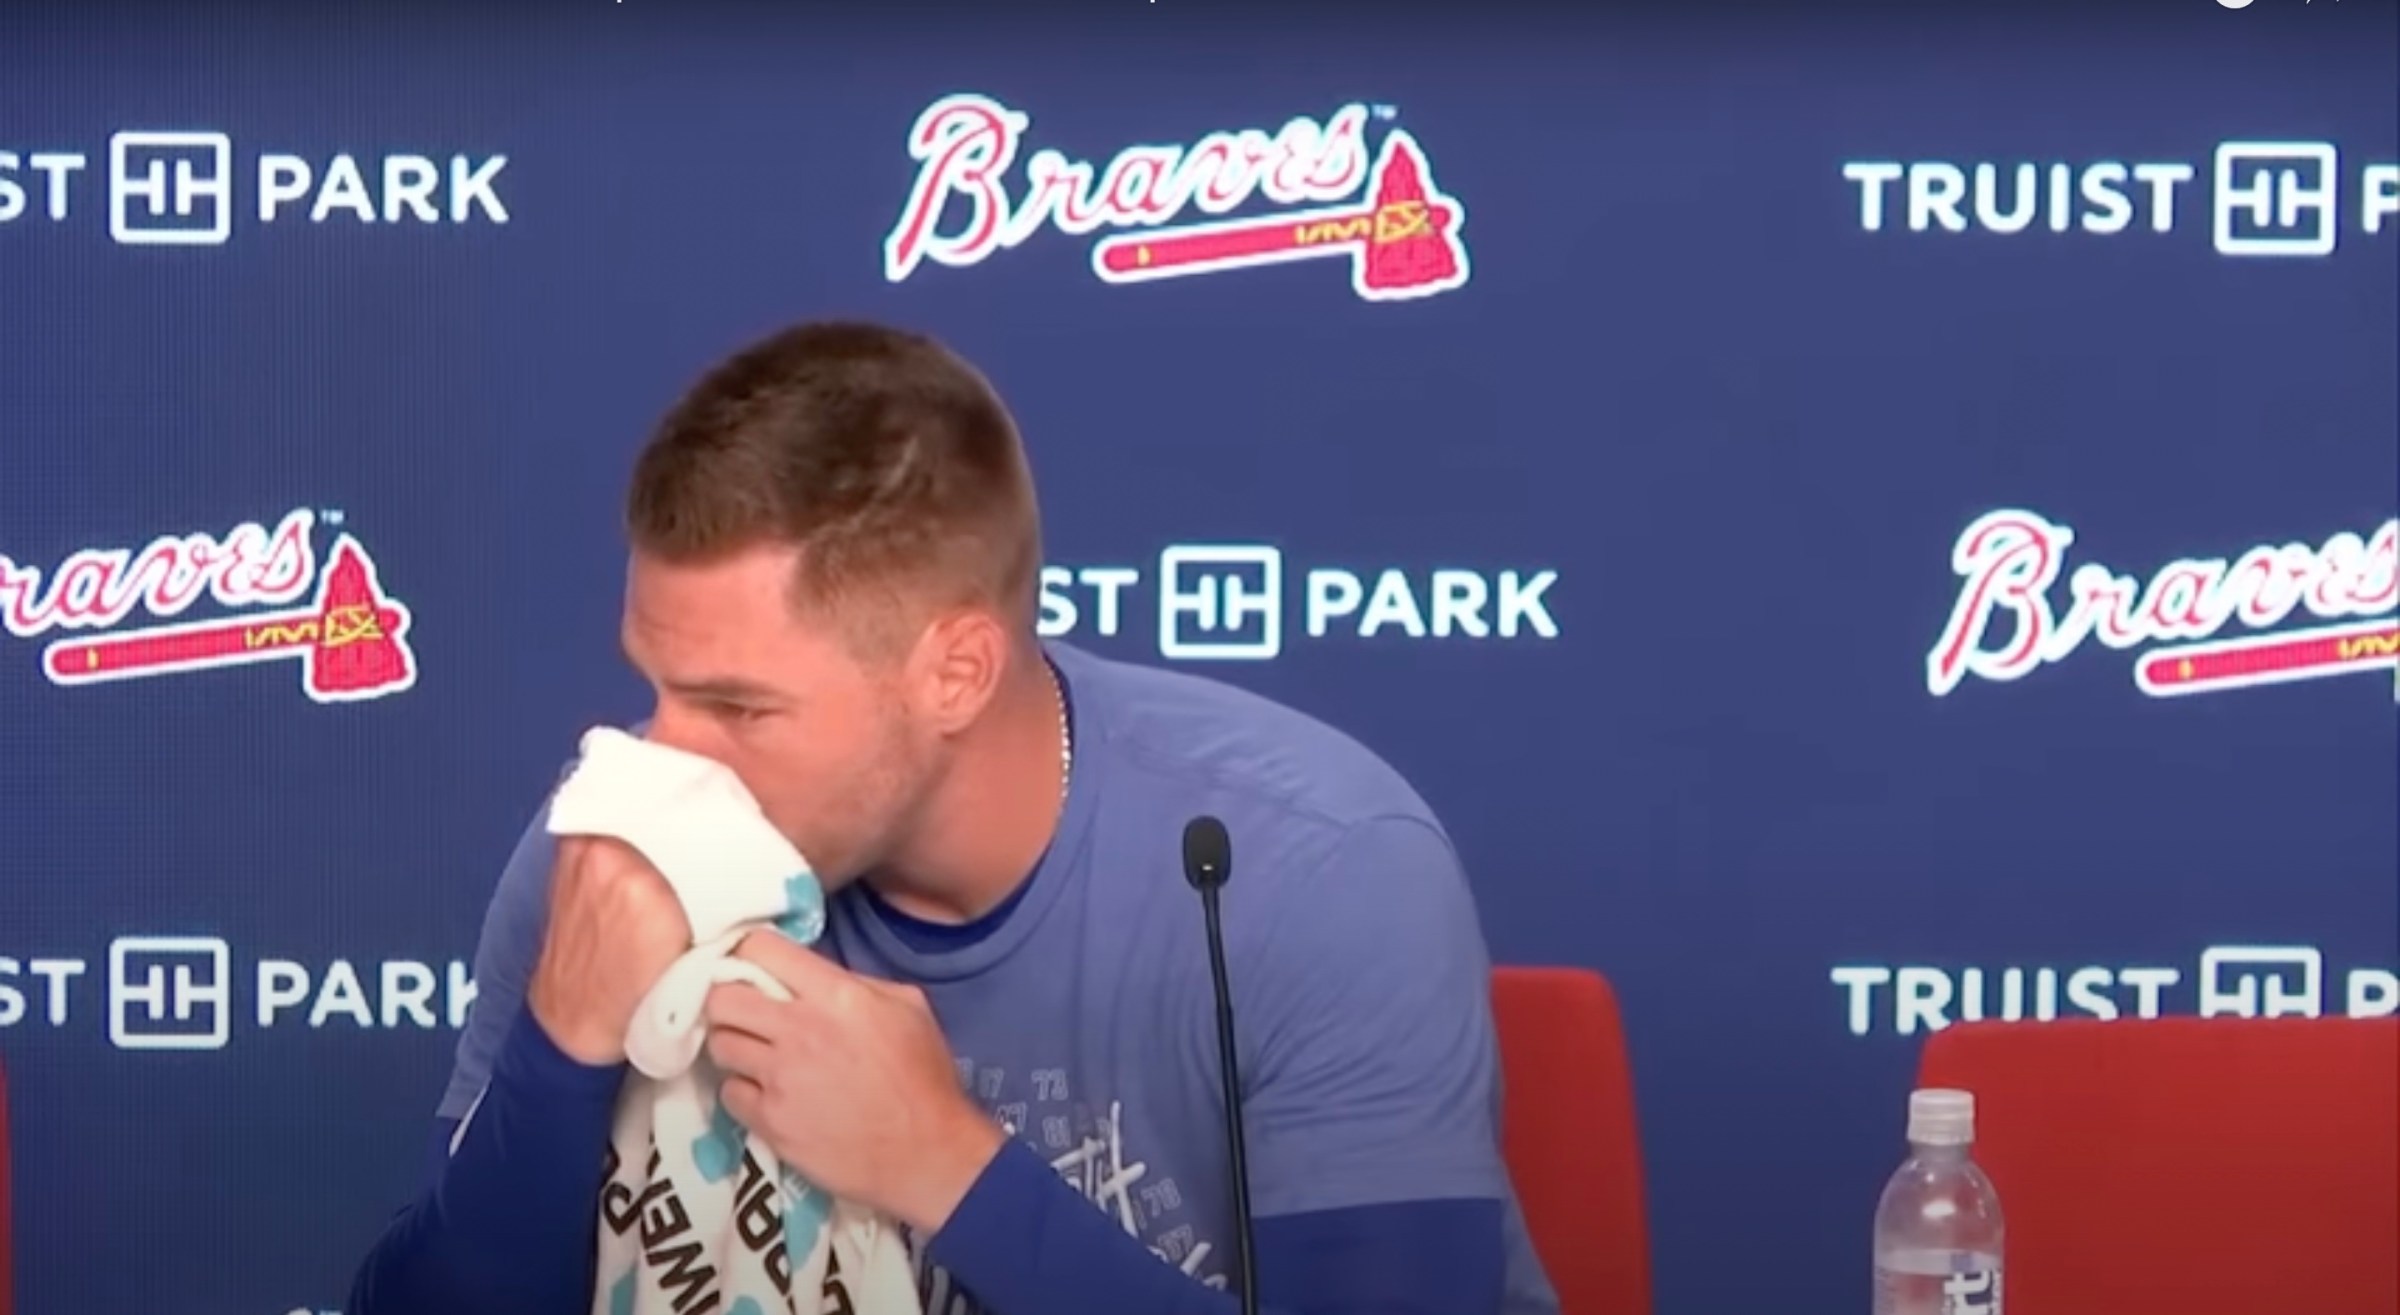 An emotional Freddie Freeman wipes his nose with a towel during a presser.